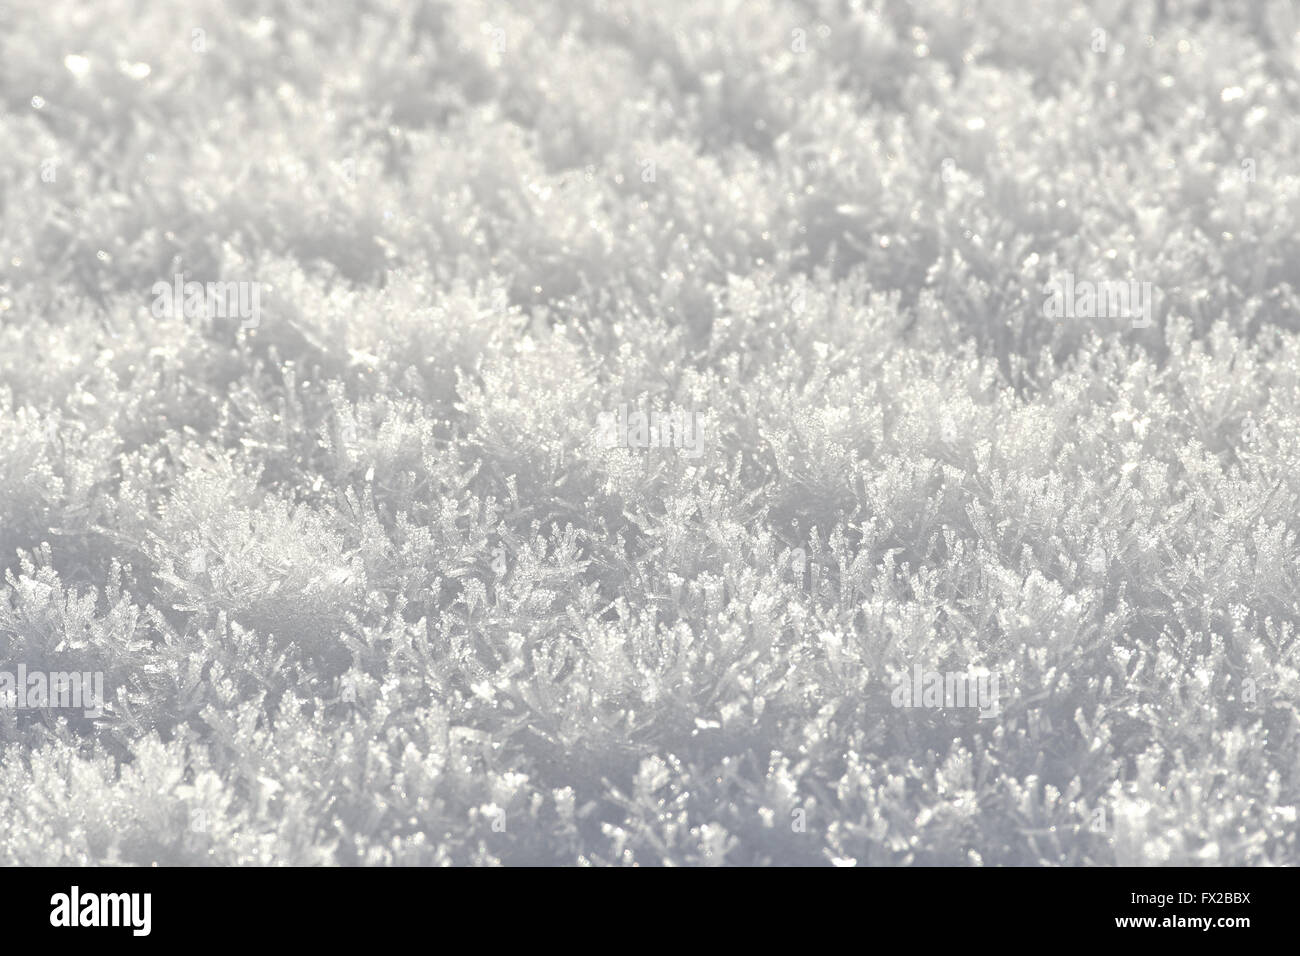 Snow crystals on the ground with high contrast shadows Stock Photo